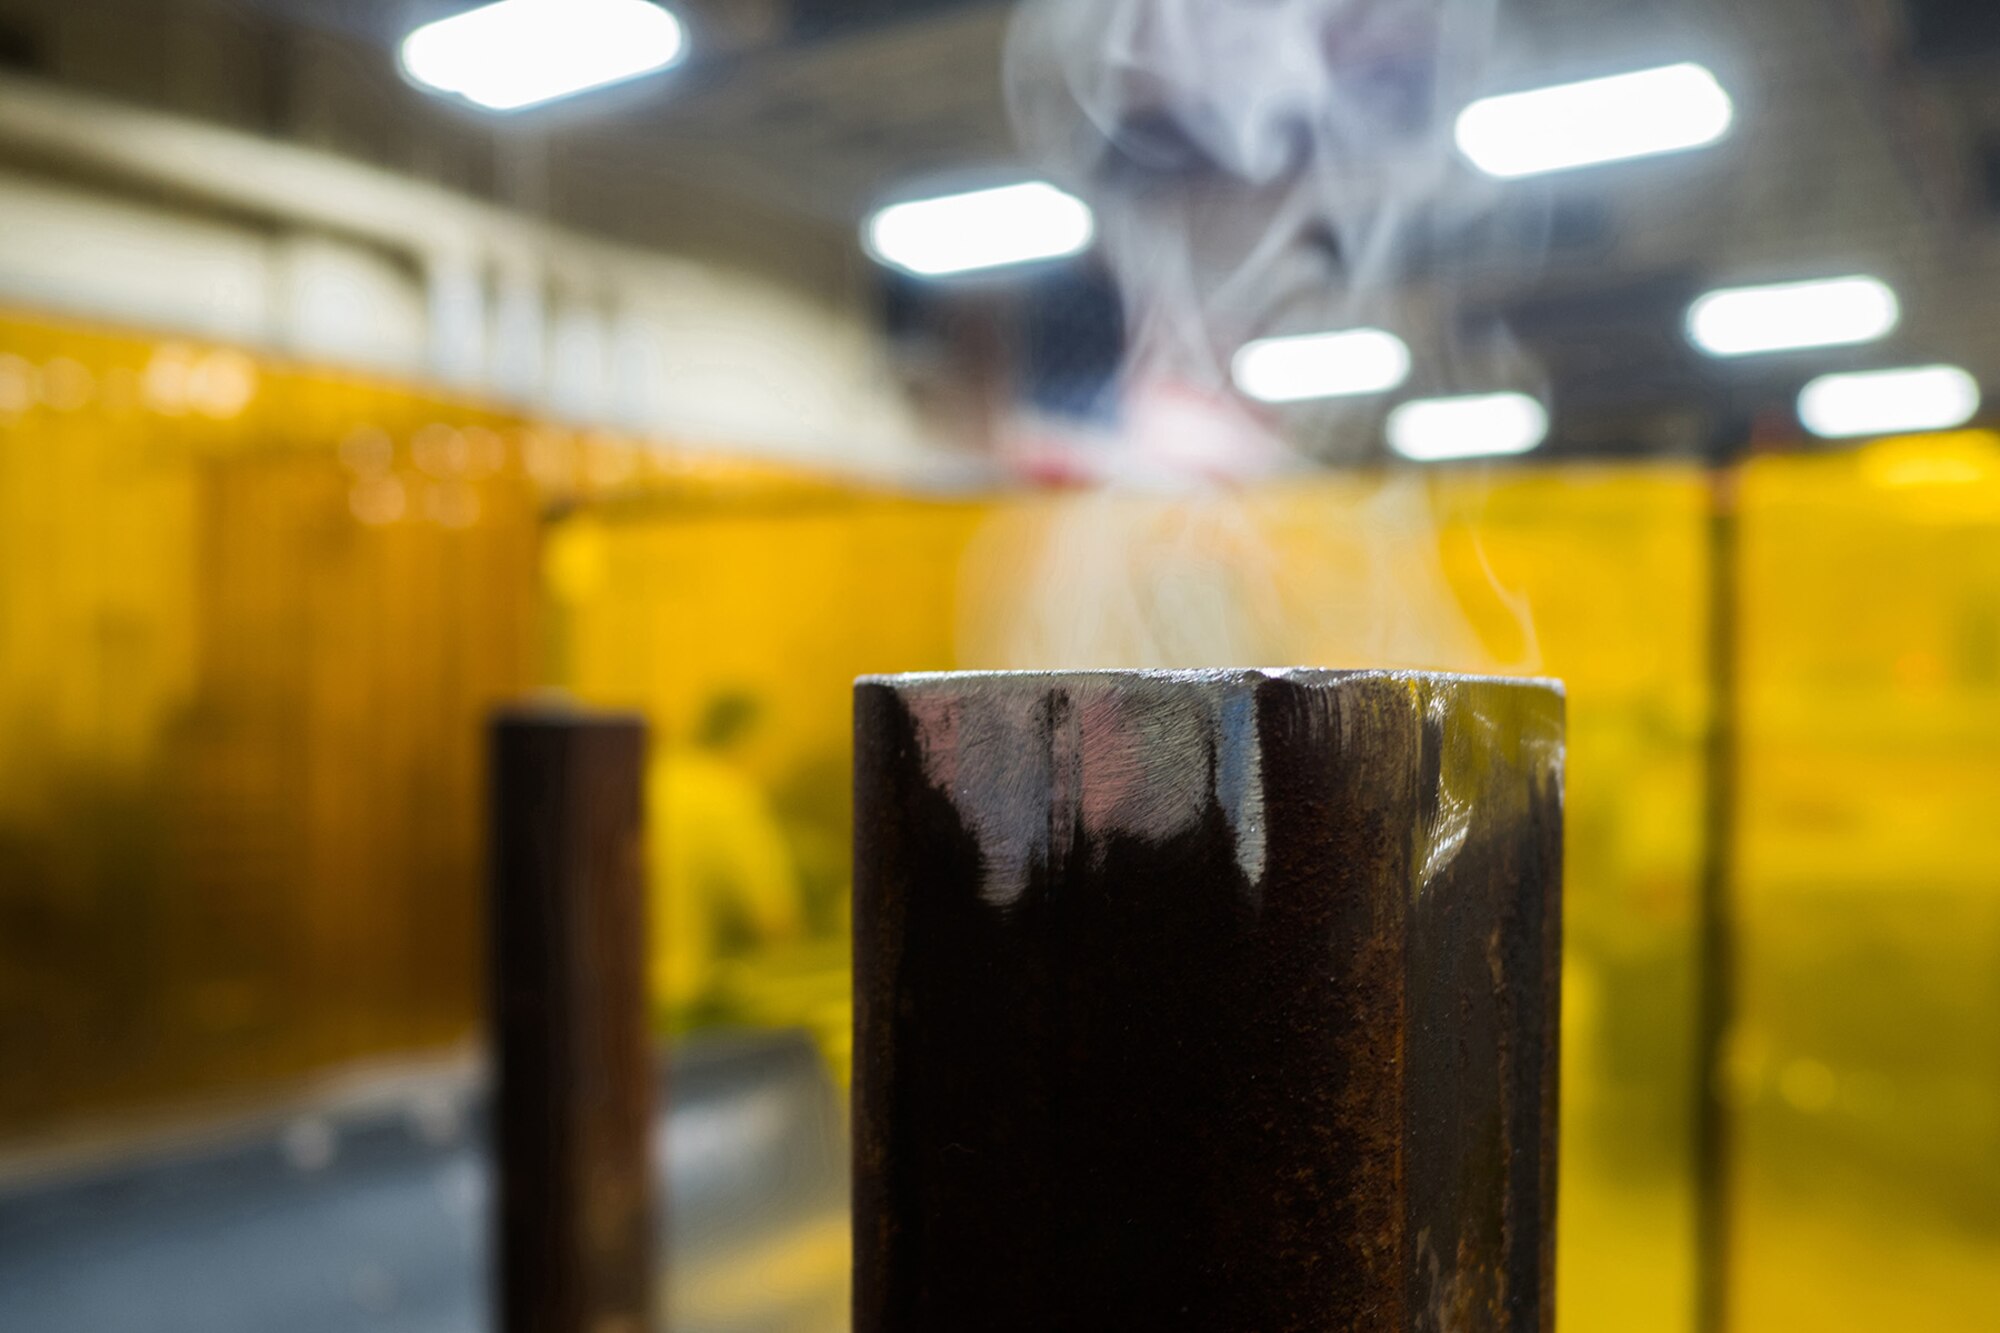 Smoke rises from a welded piece of metal in the metals fabrication shop on Joint Base Elmendorf-Richardson, Alaska, May 9, 2018. Aircraft Metals Technology Airmen measure broken or worn parts, draw working sketches, make templates, perform precision grinding remove poisonous or corrosive deposits from parts, and write programs for machines using manual and computer-aided manufacturing.